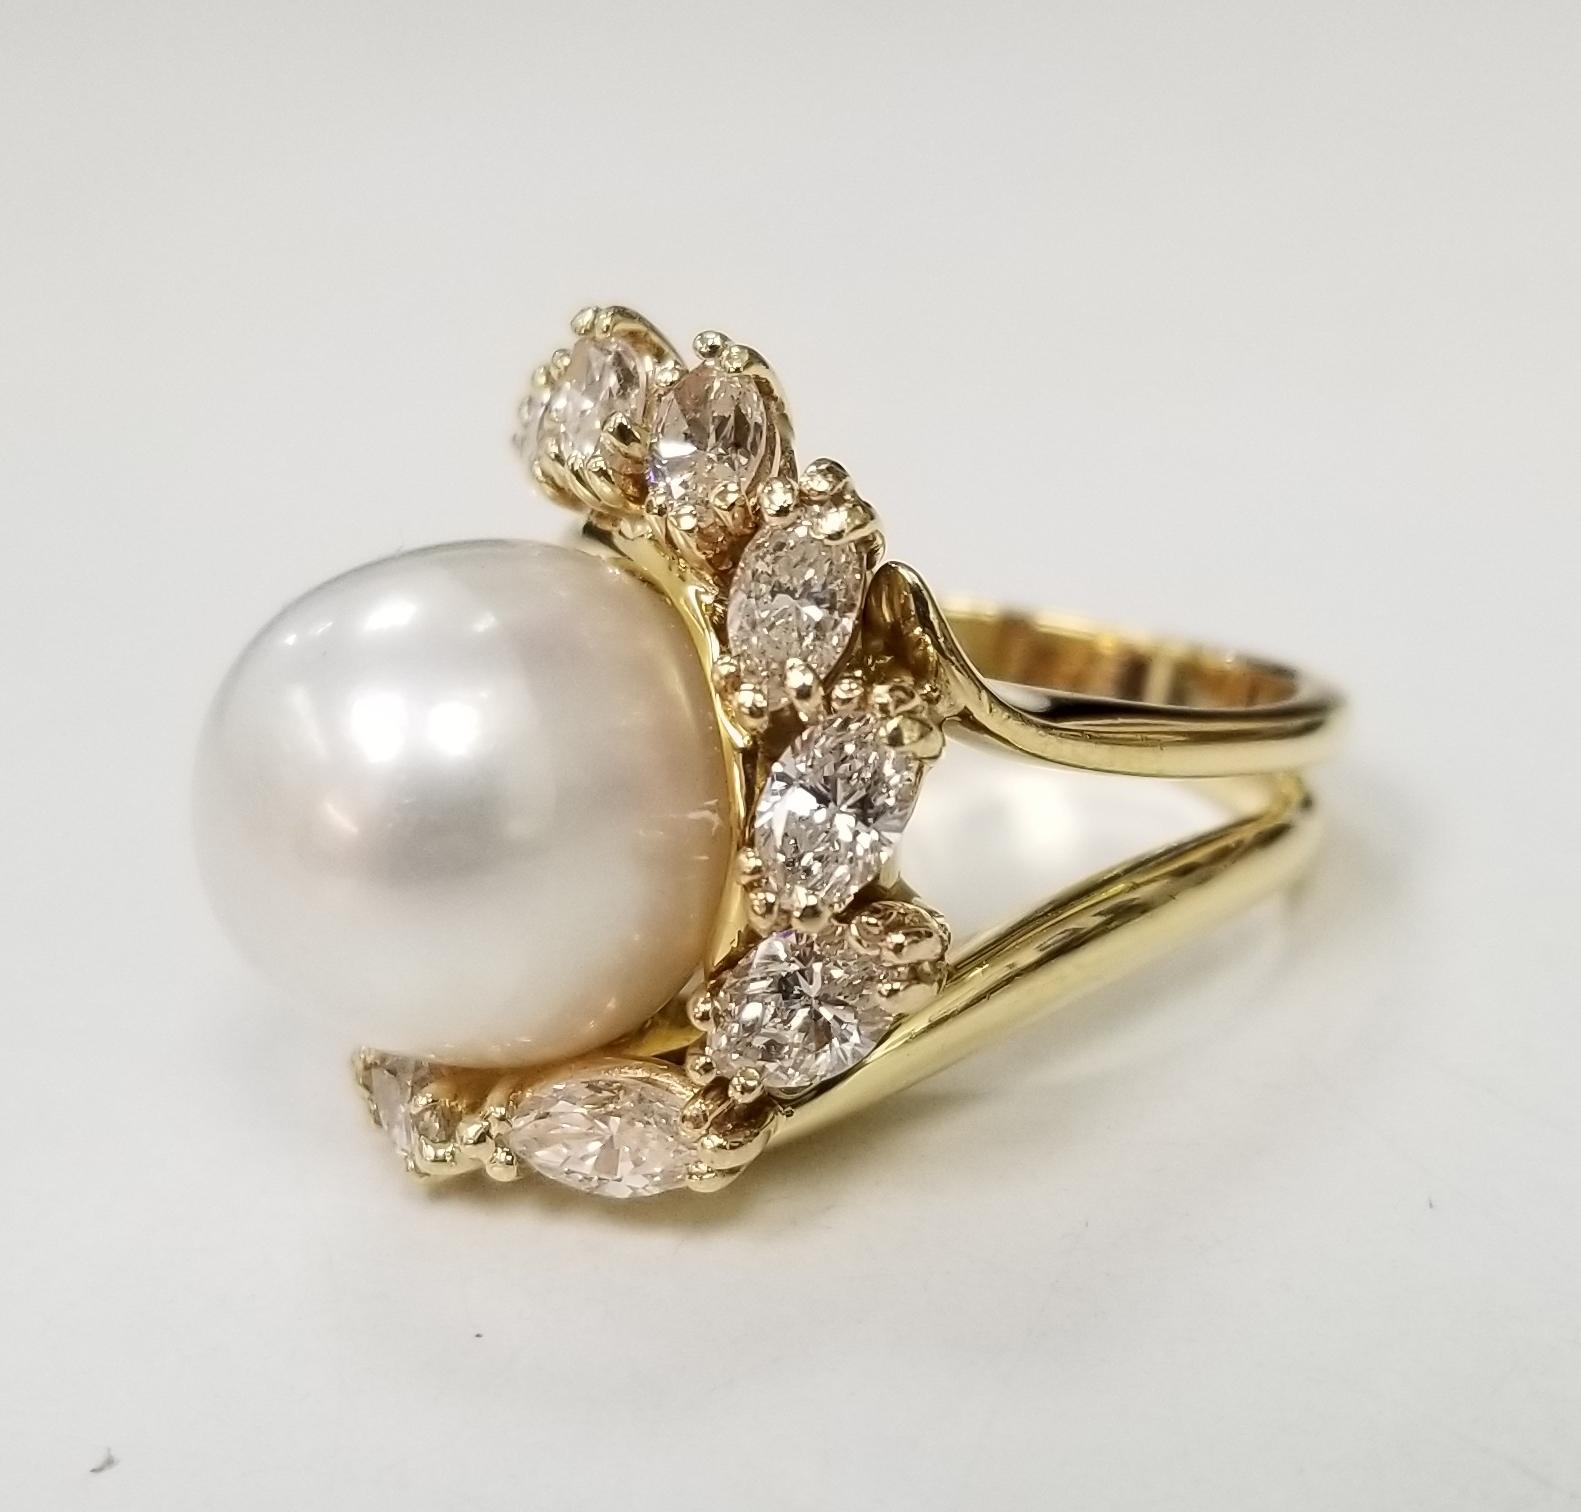 Contemporary 18k Yg South Sea Pearl with Marquise Diamonds, Ring by George Hoffman